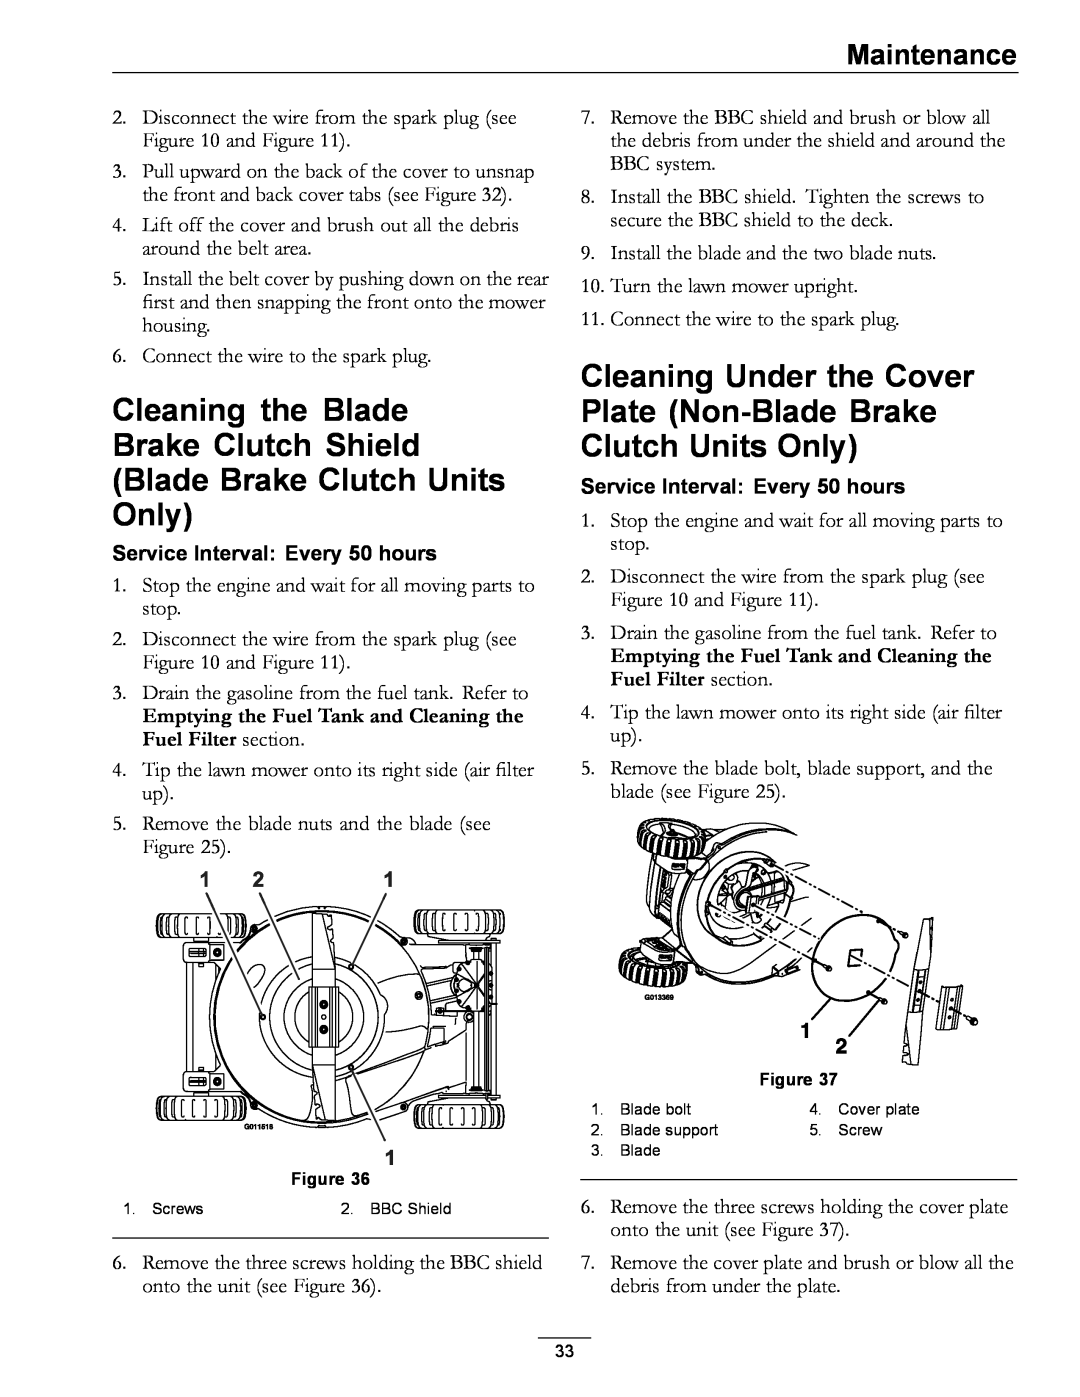 Exmark 4500-686 Rev. B Cleaning the Blade Brake Clutch Shield, Cleaning Under the Cover Plate Non-BladeBrake, Maintenance 